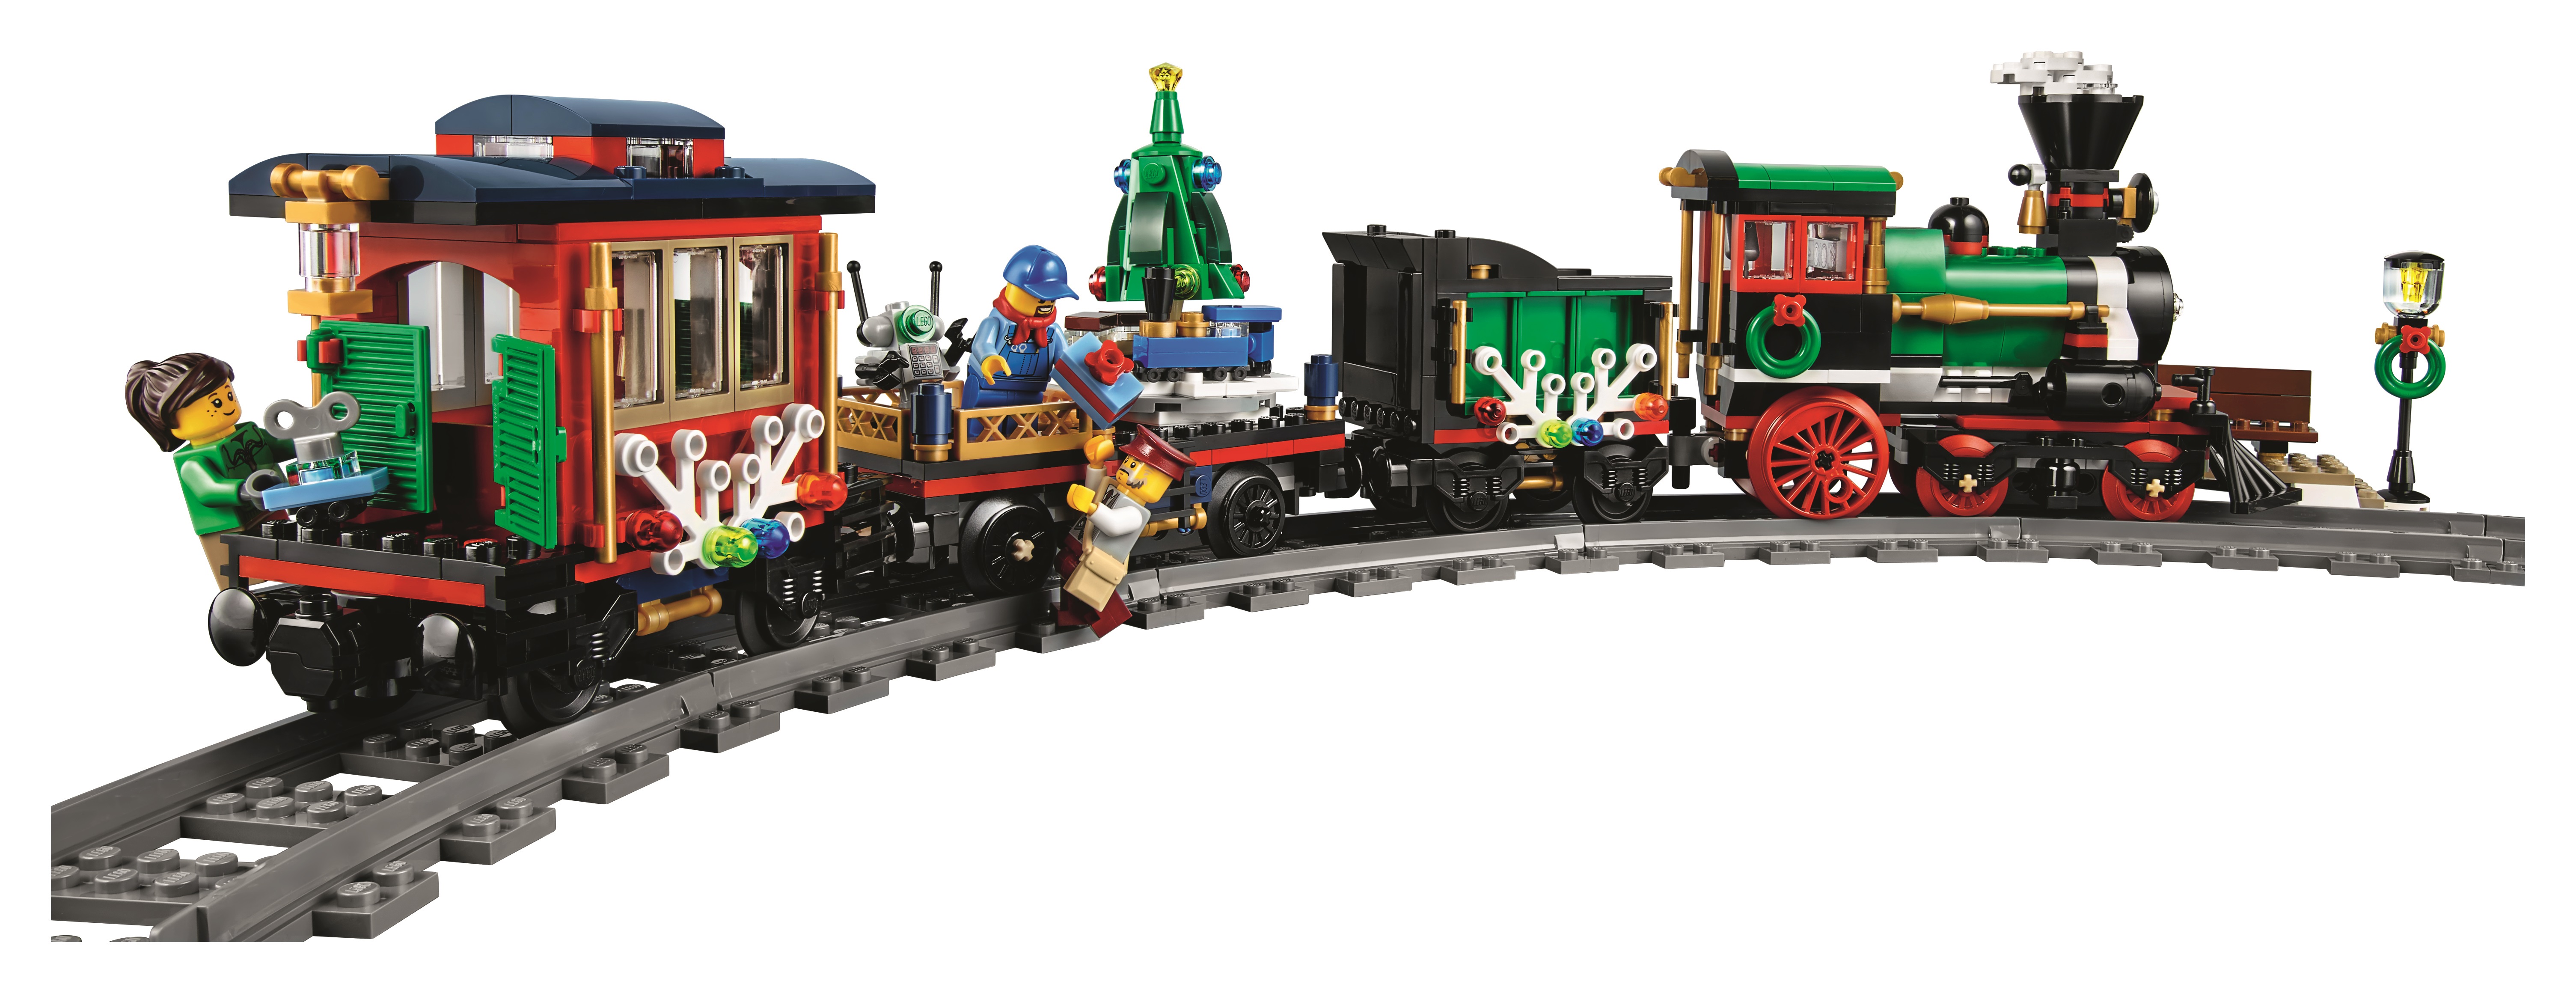 Christmas comes early with the LEGO 10254 Winter Holiday ...